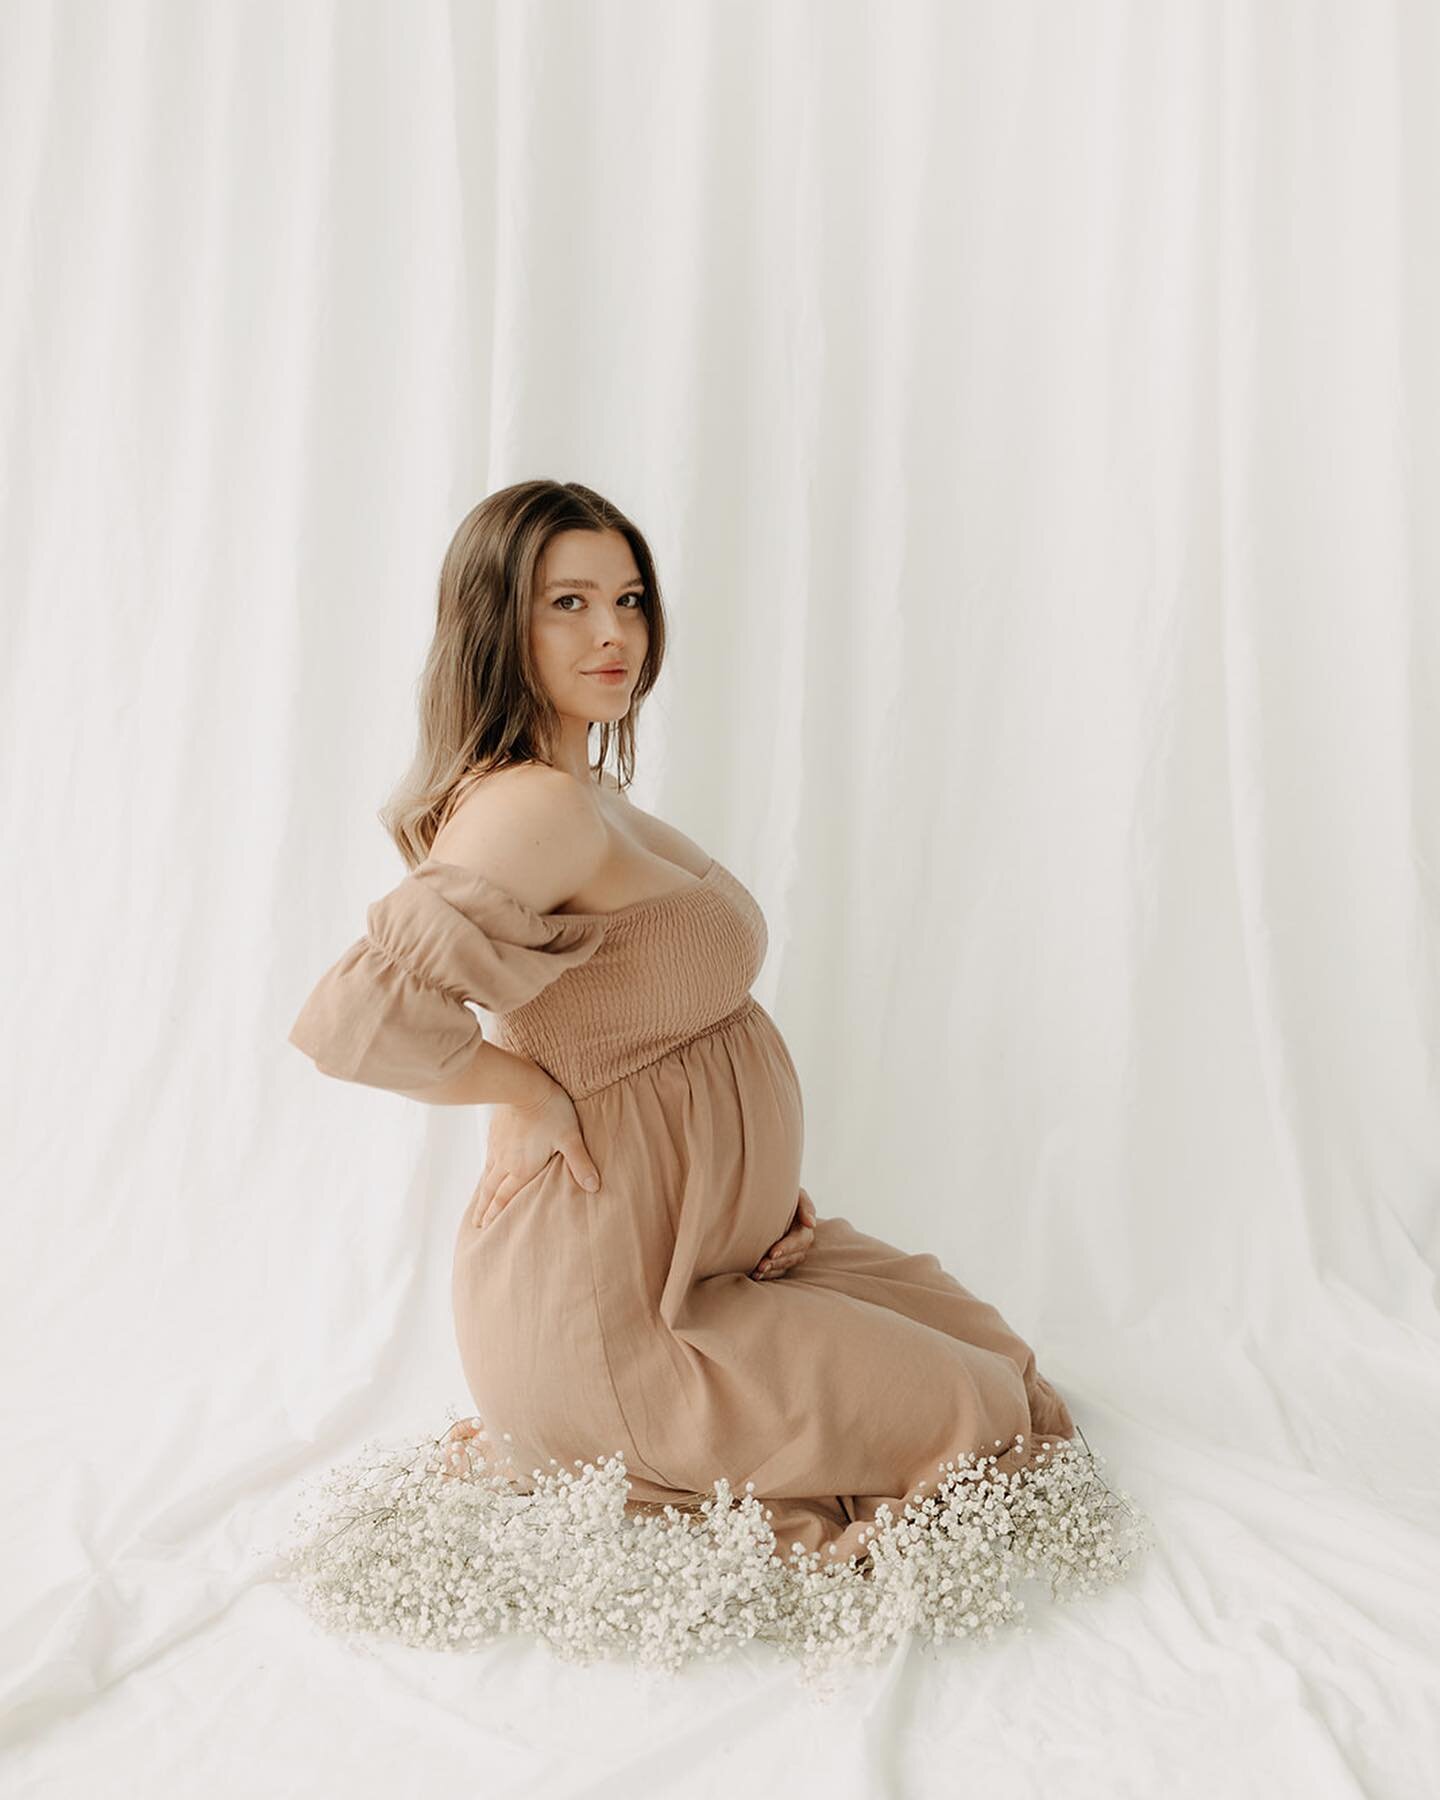 Such a simple yet elegant set design for this maternity photo shoot with @alexisamontero 
Which one is your favorite 👇🏽 comment below. 

Photos by @alex.quetzali